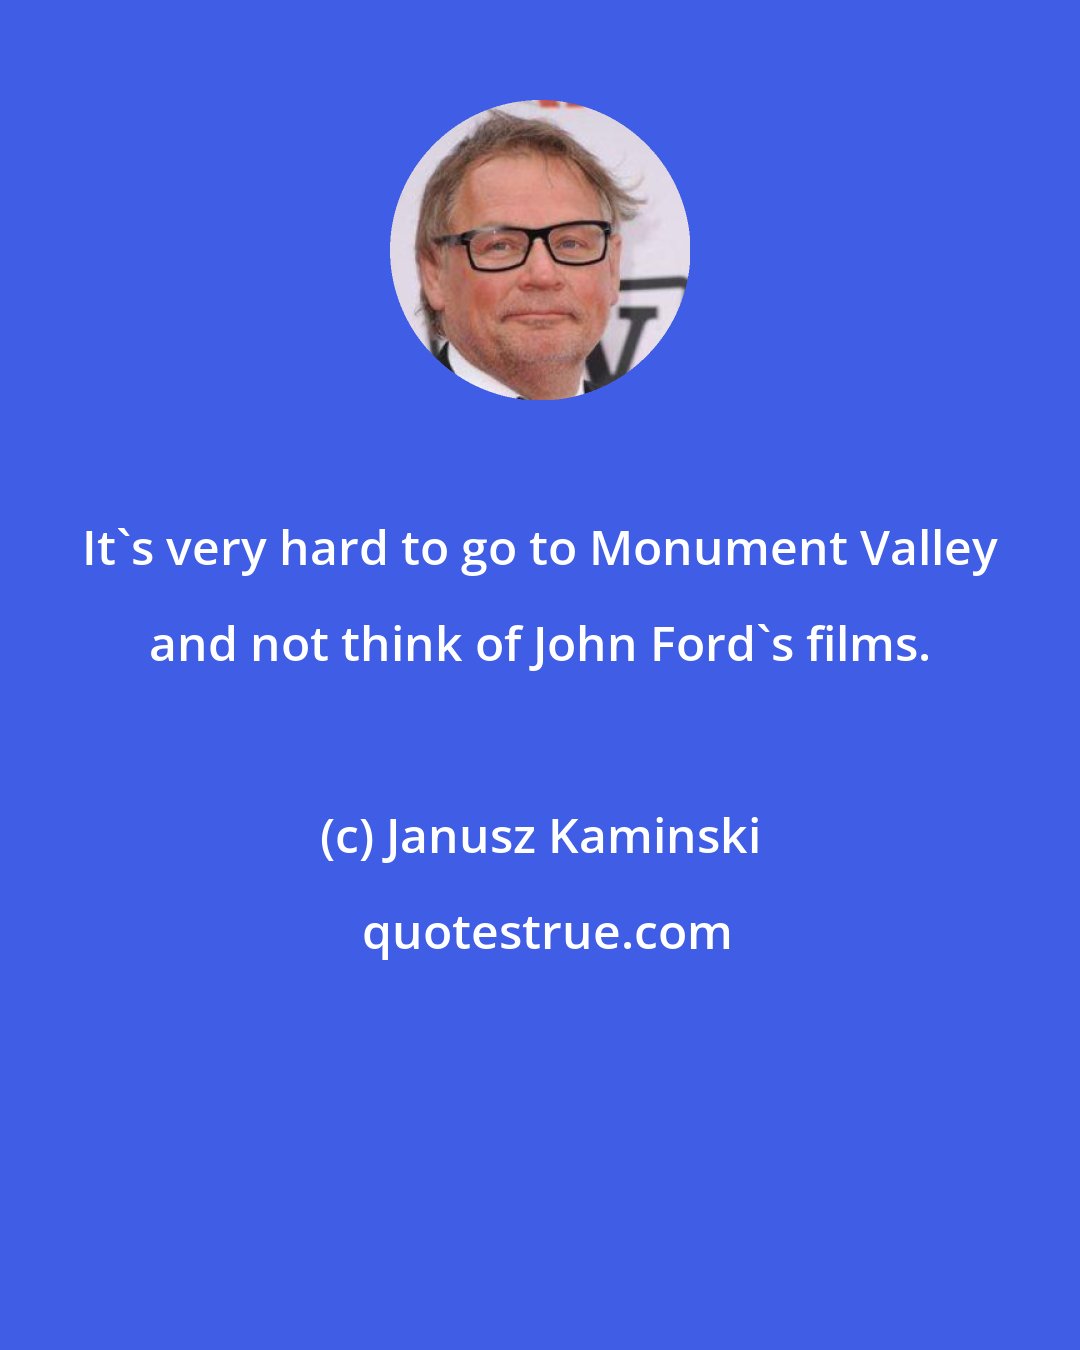 Janusz Kaminski: It's very hard to go to Monument Valley and not think of John Ford's films.